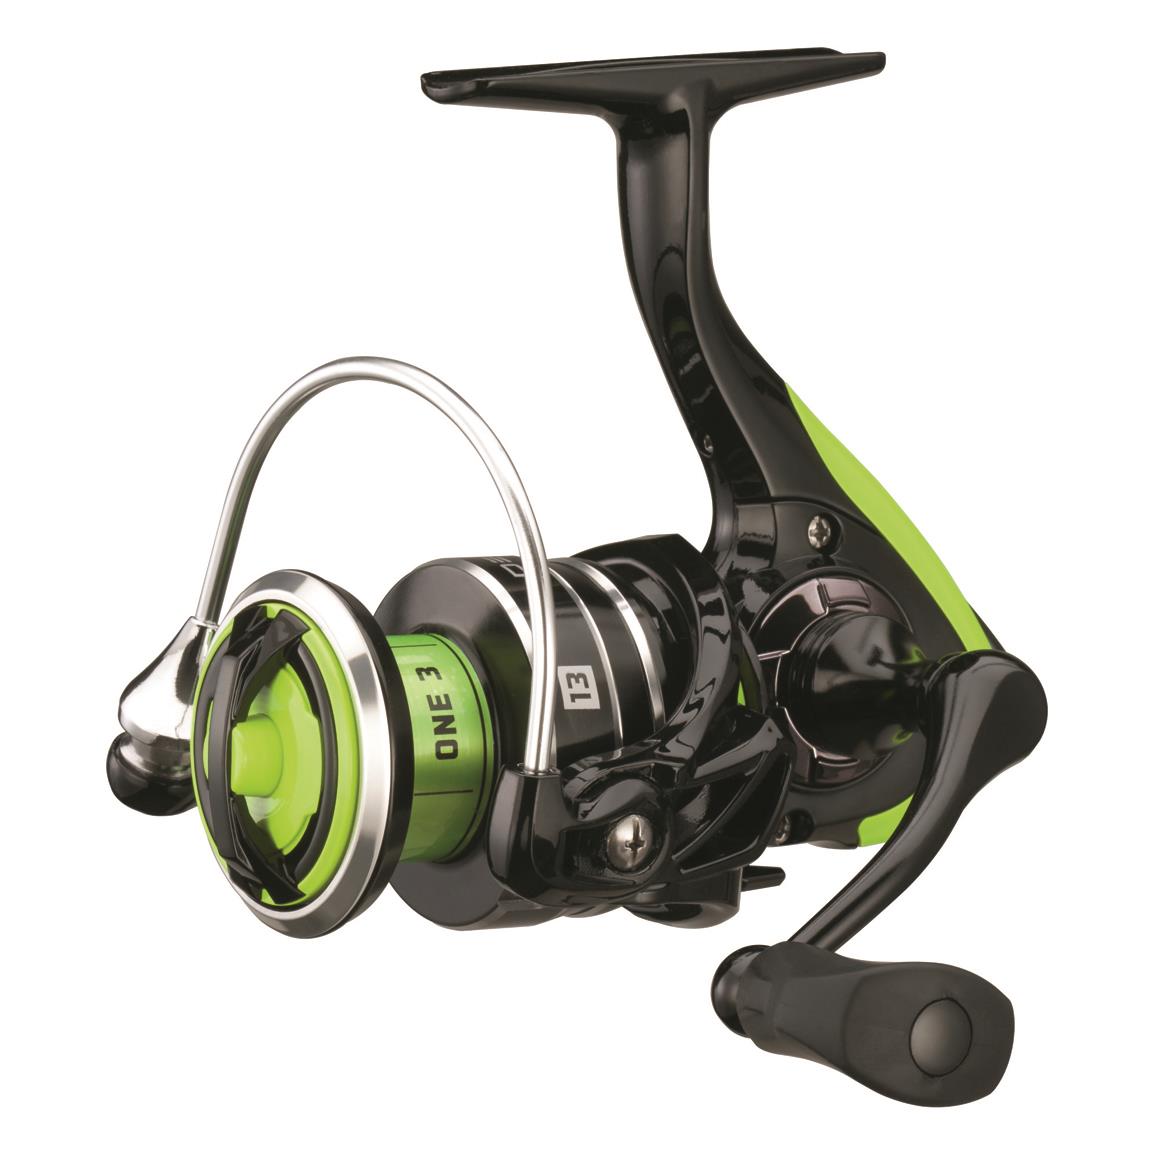 ONE3 Fishing Origin A Baitcasting Reel with Defy White Rod Combo - 708331,  Casting Combos at Sportsman's Guide